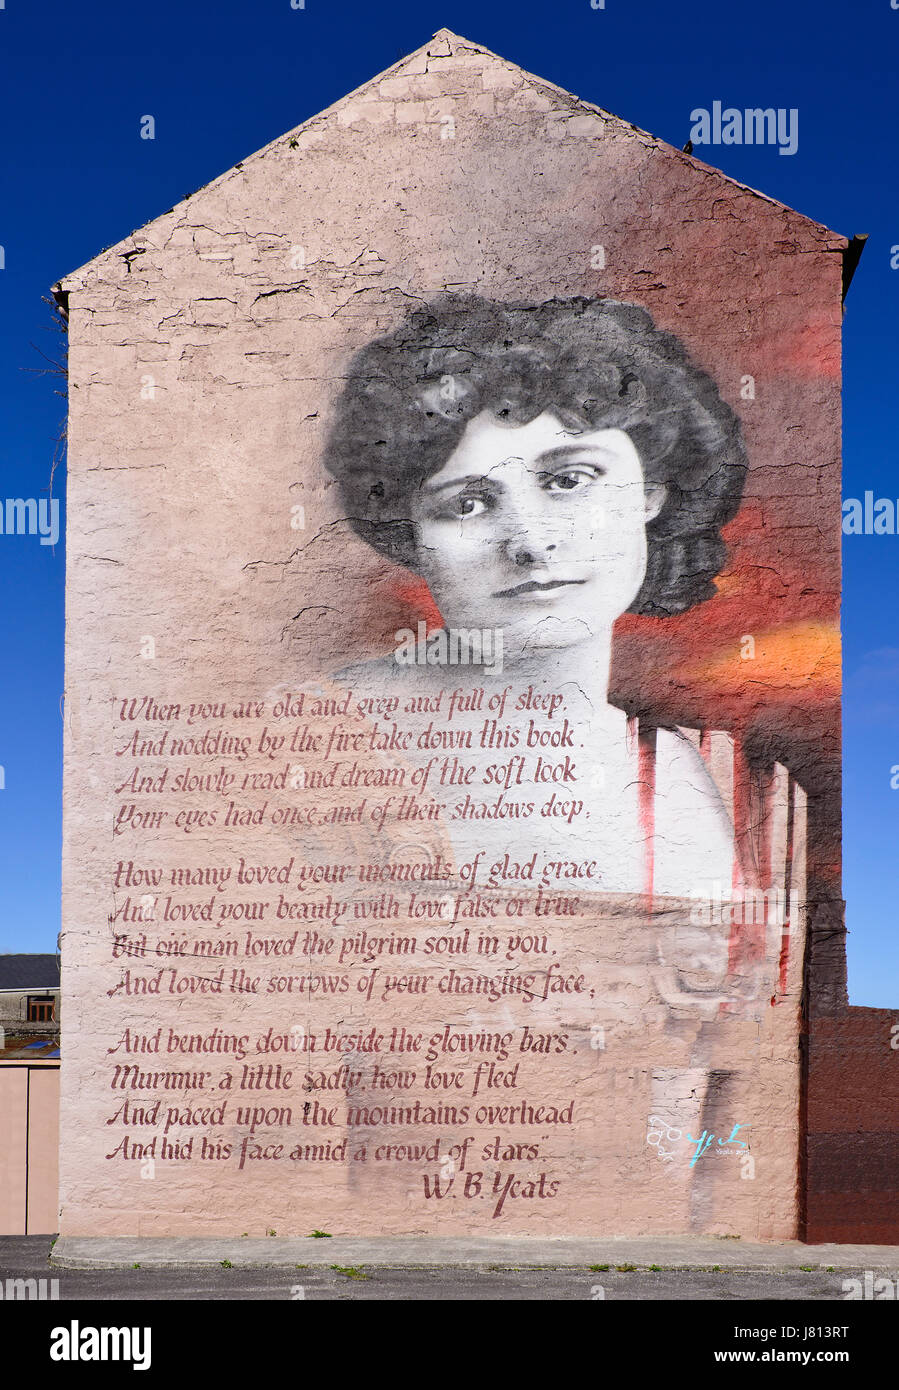 Ireland, County Sligo, Sligo, Wall mural of Maud Gonne with poem by W B yeats titled When you are old. Stock Photo